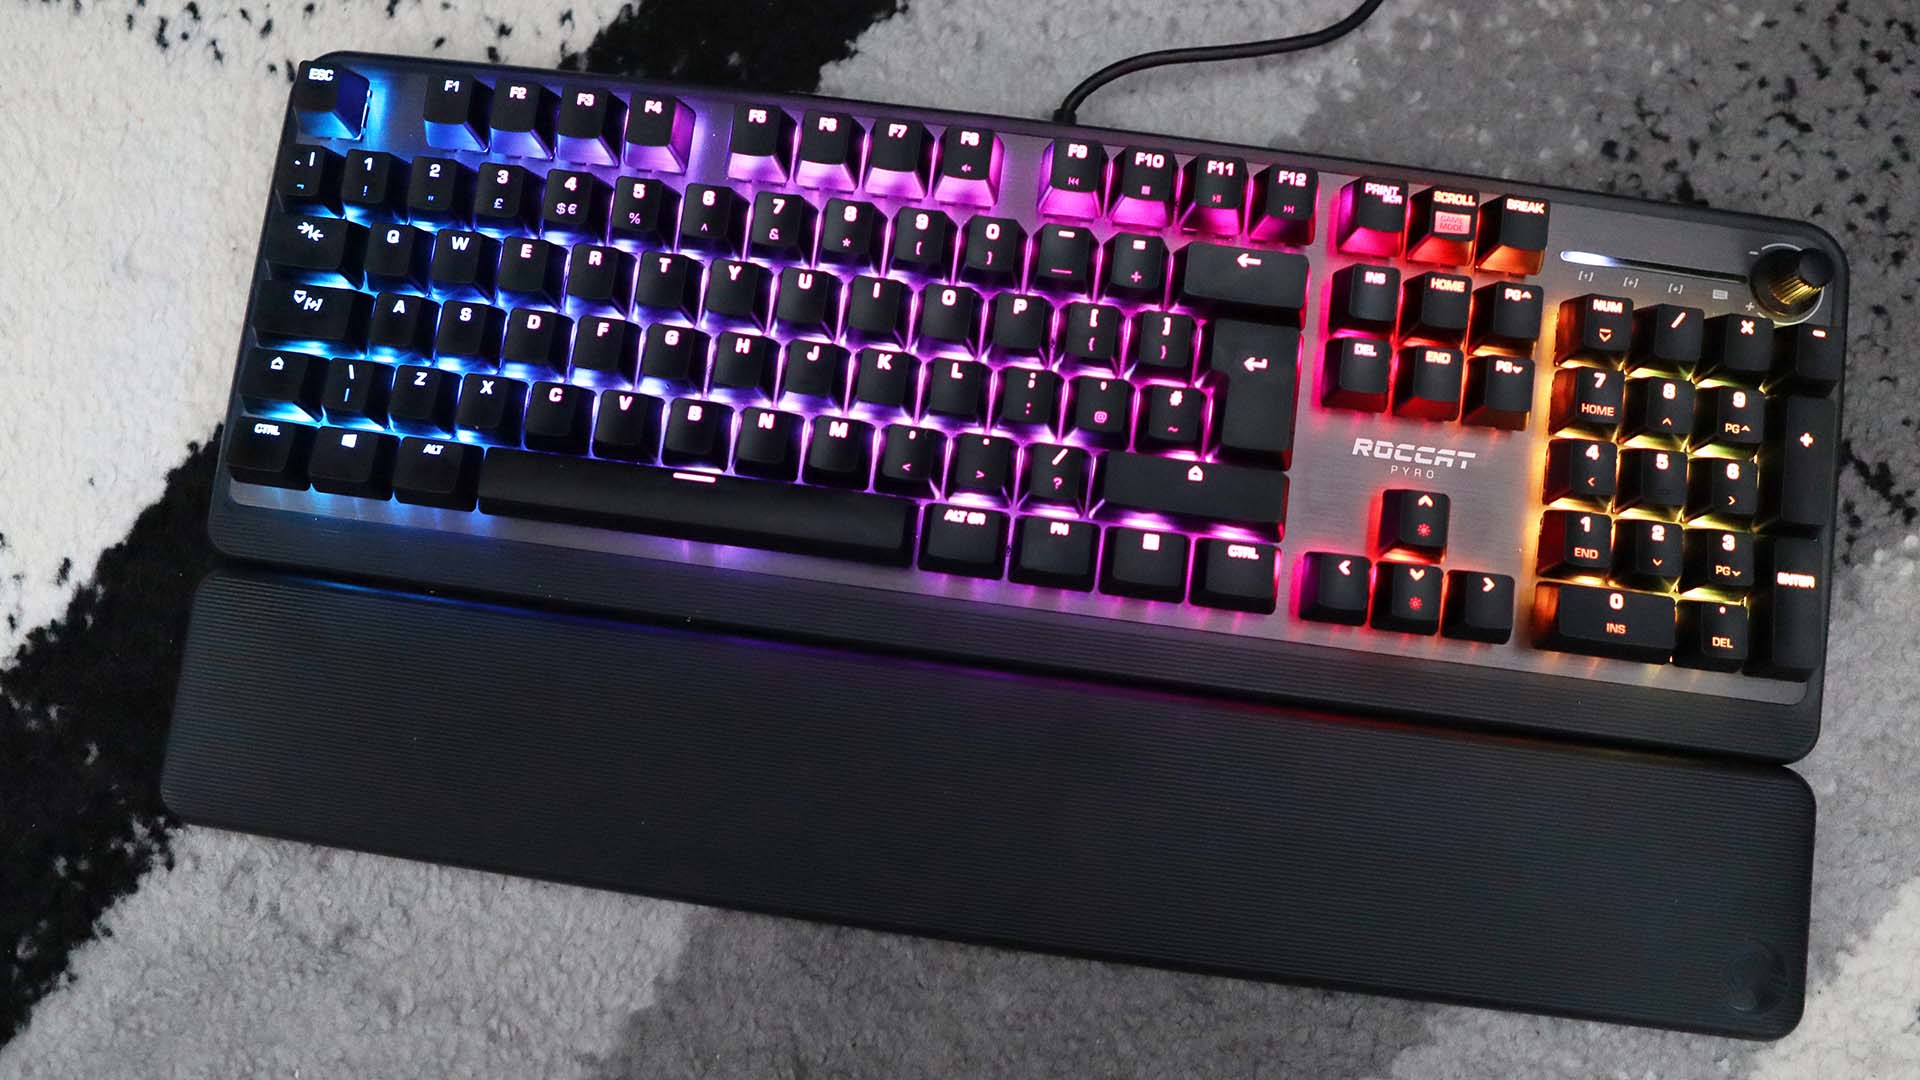 The Roccat Pyro pictured on a desktop with RGB lighting enabled